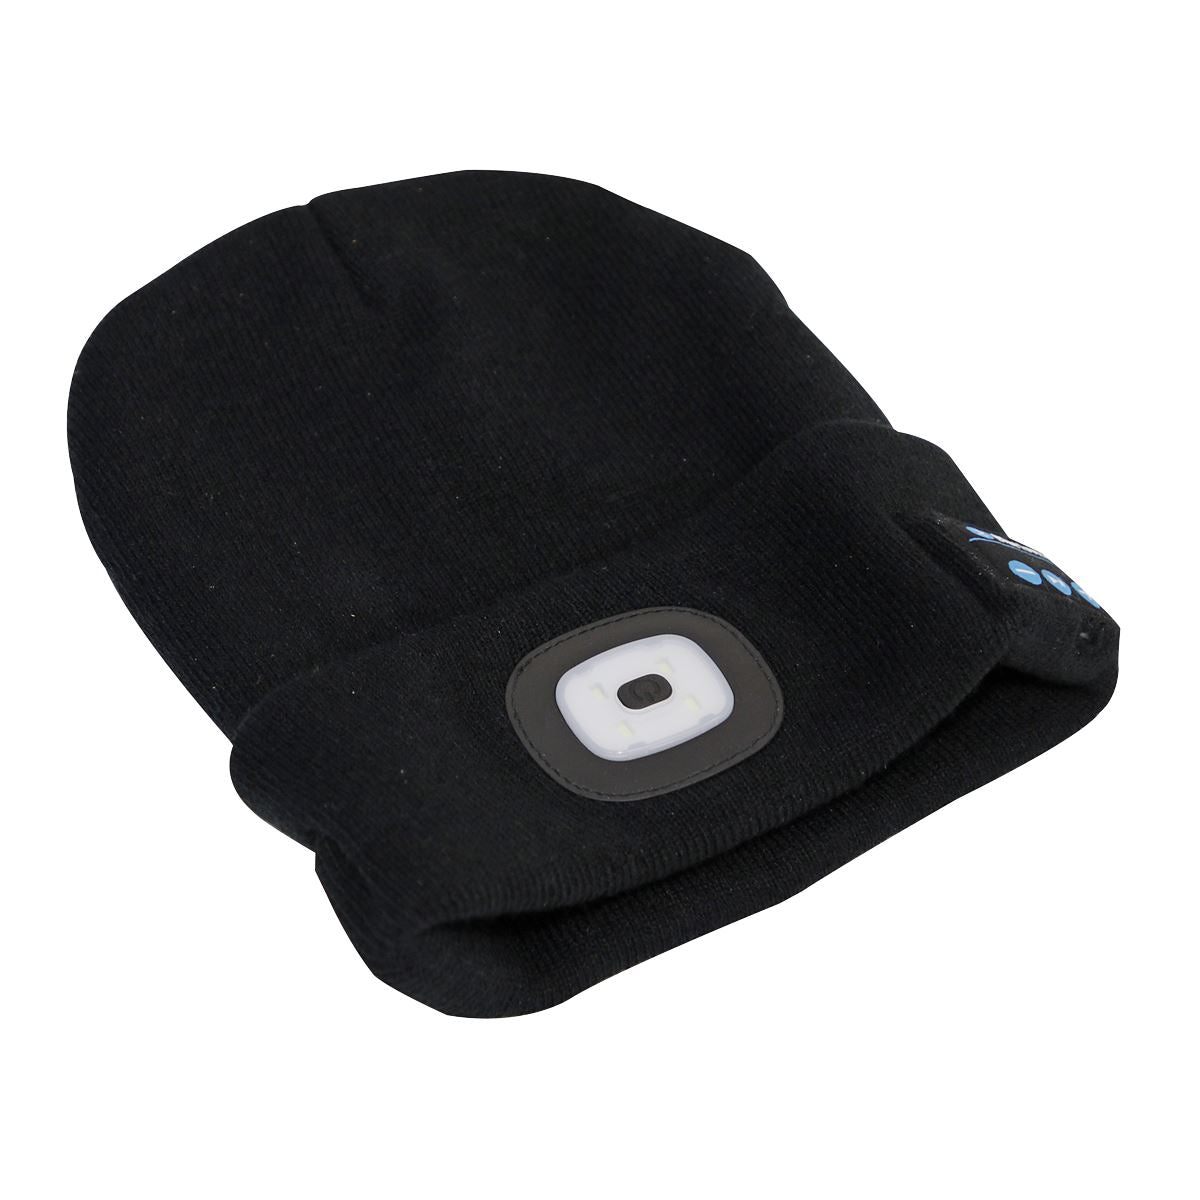 Sealey Beanie Hat 4 SMD LED Head Light with Wireless Headphones USB Rechargeable